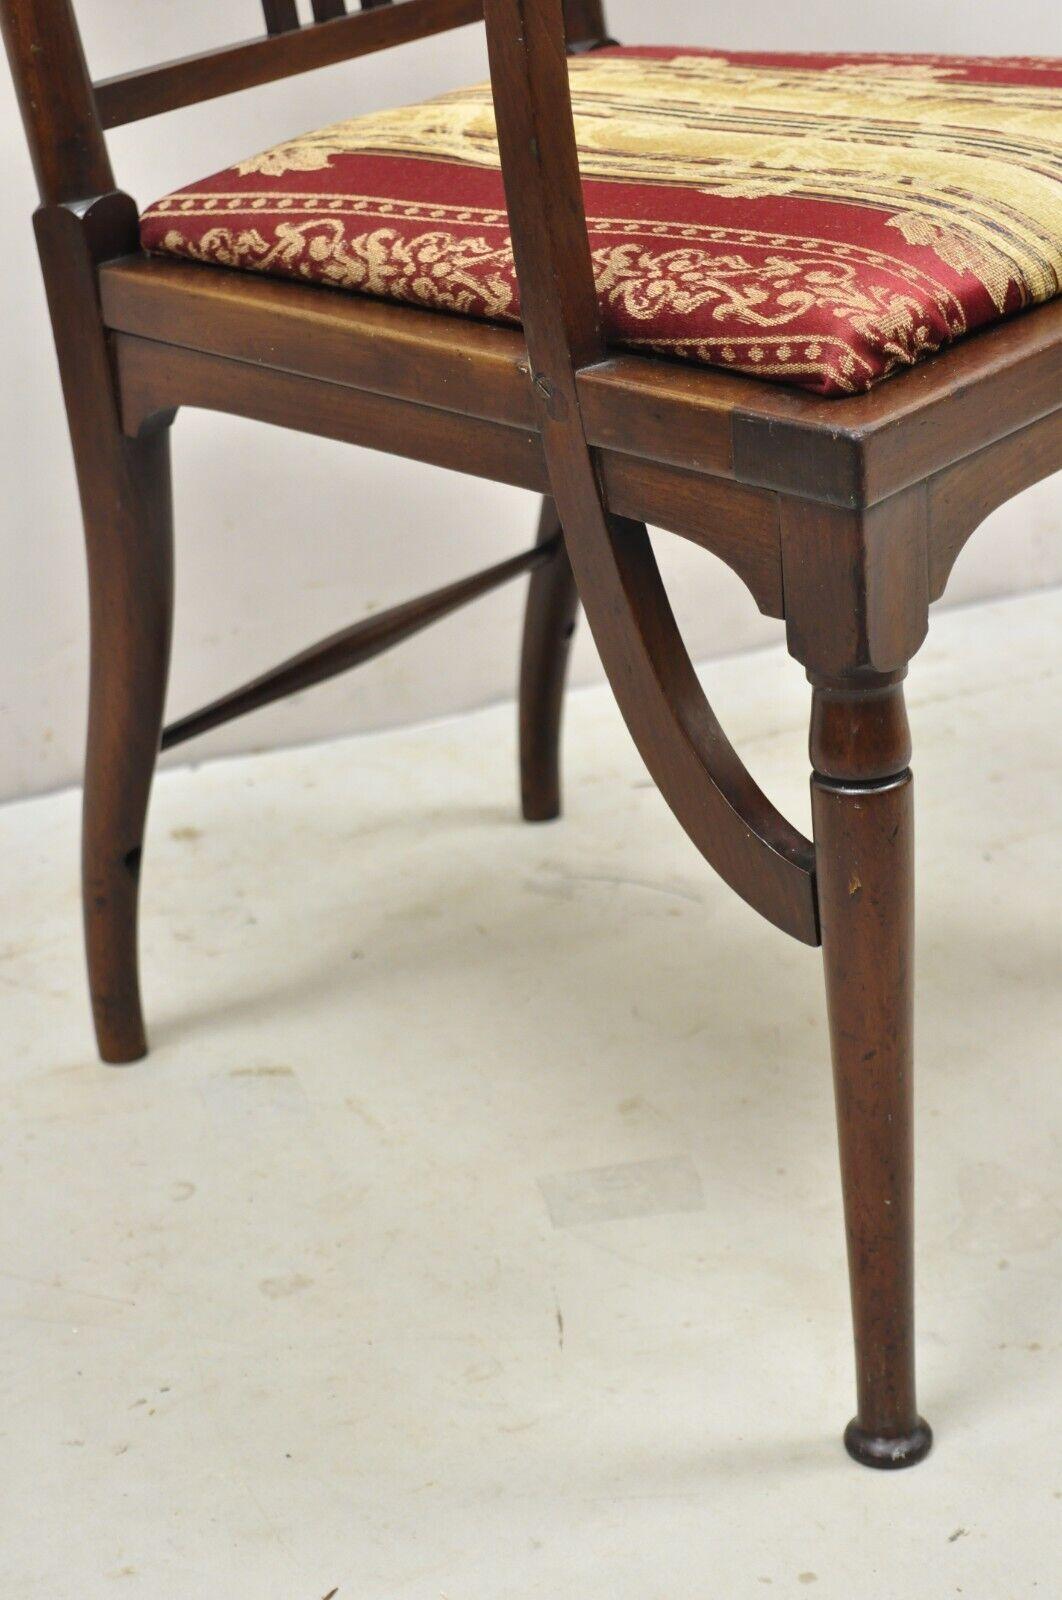 20th Century Antique Mahogany Art Nouveau Tall Finial Parlor Chair After J.S. Henry For Sale